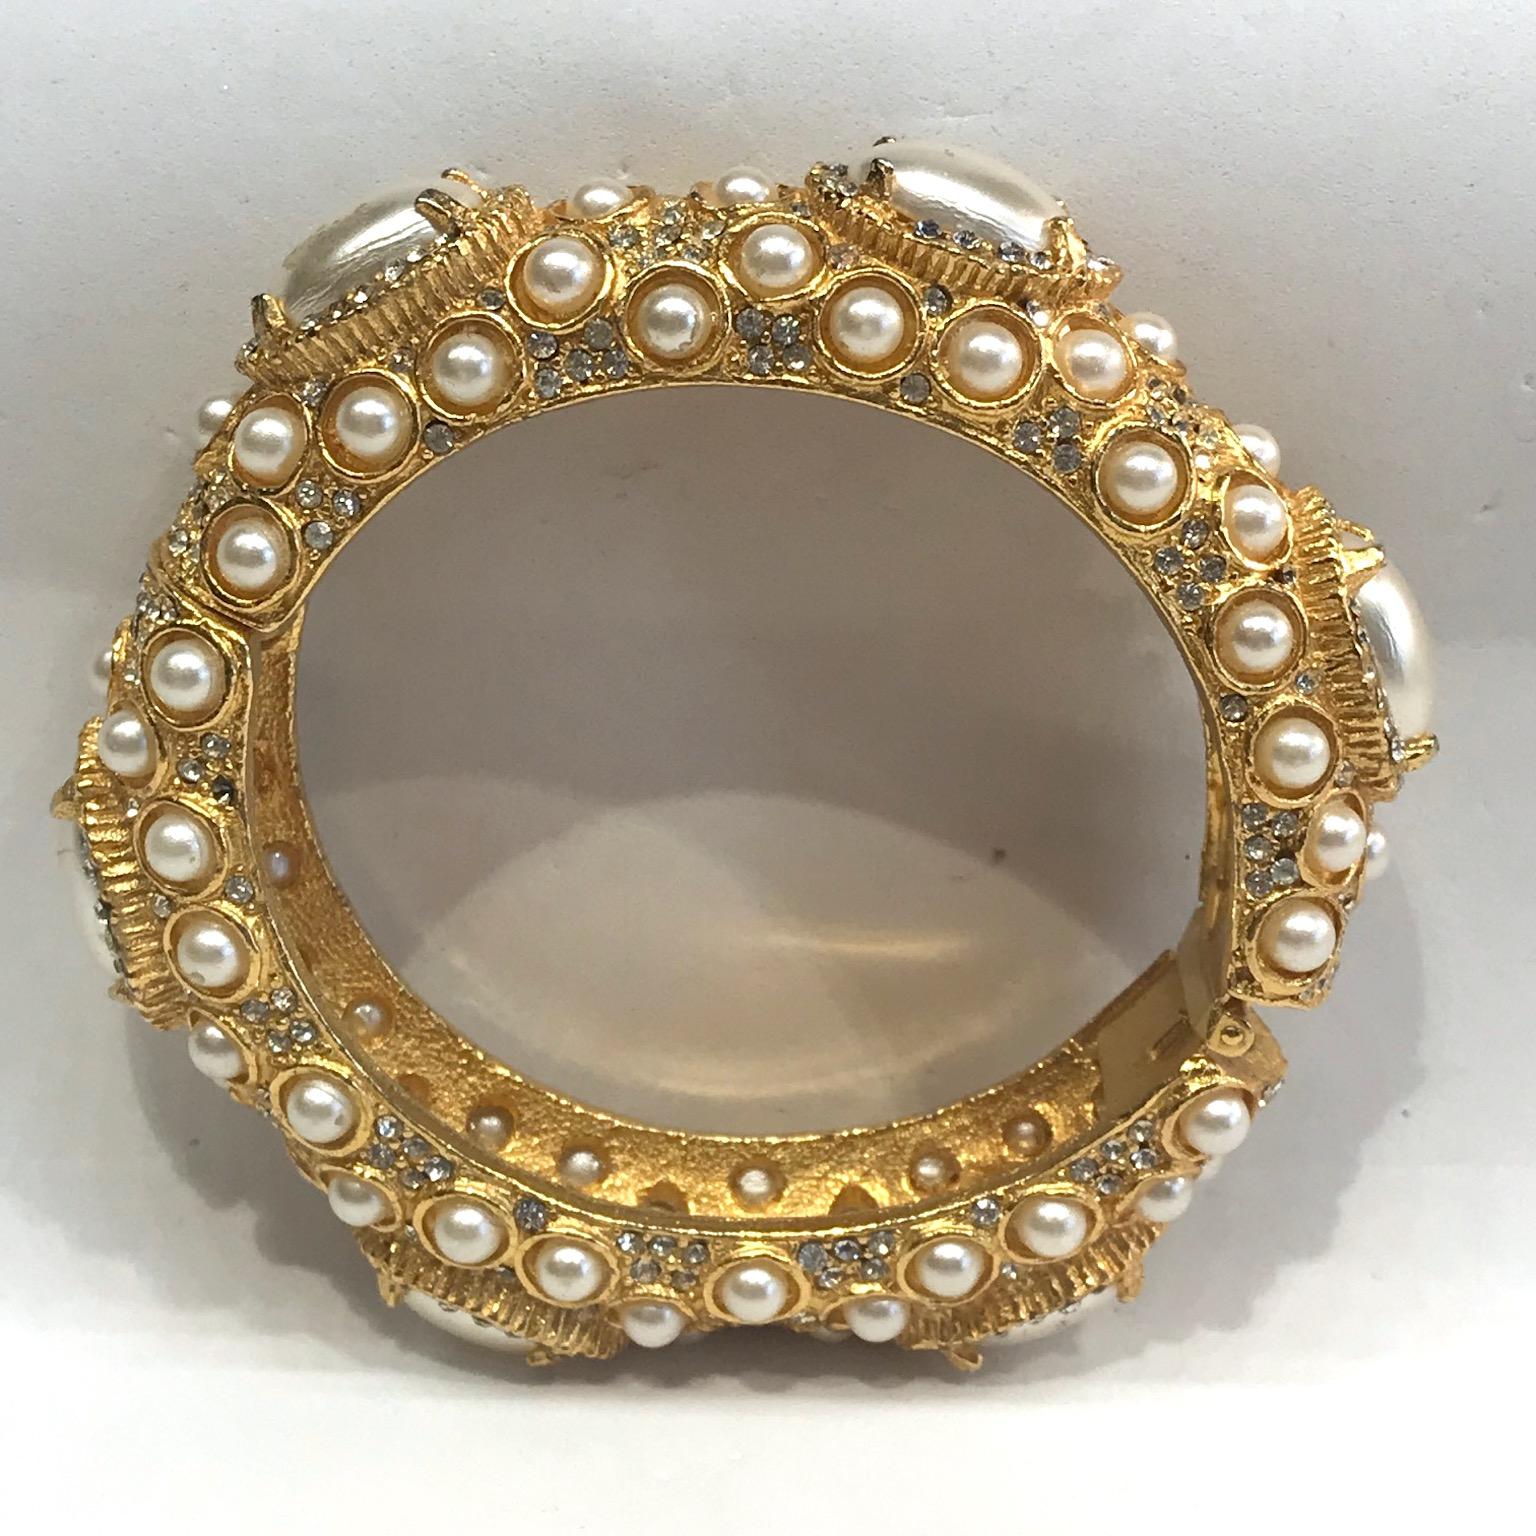 A very nice Kenneth Jay Lane 1980s clamper style hinge bangle from the Grace Collection. Originally produced in the 1960s, the Grace Collection is an iconic design of Kennth Lane. In the 1980s, Lane worked with the Laguna Jewelry Company, known for